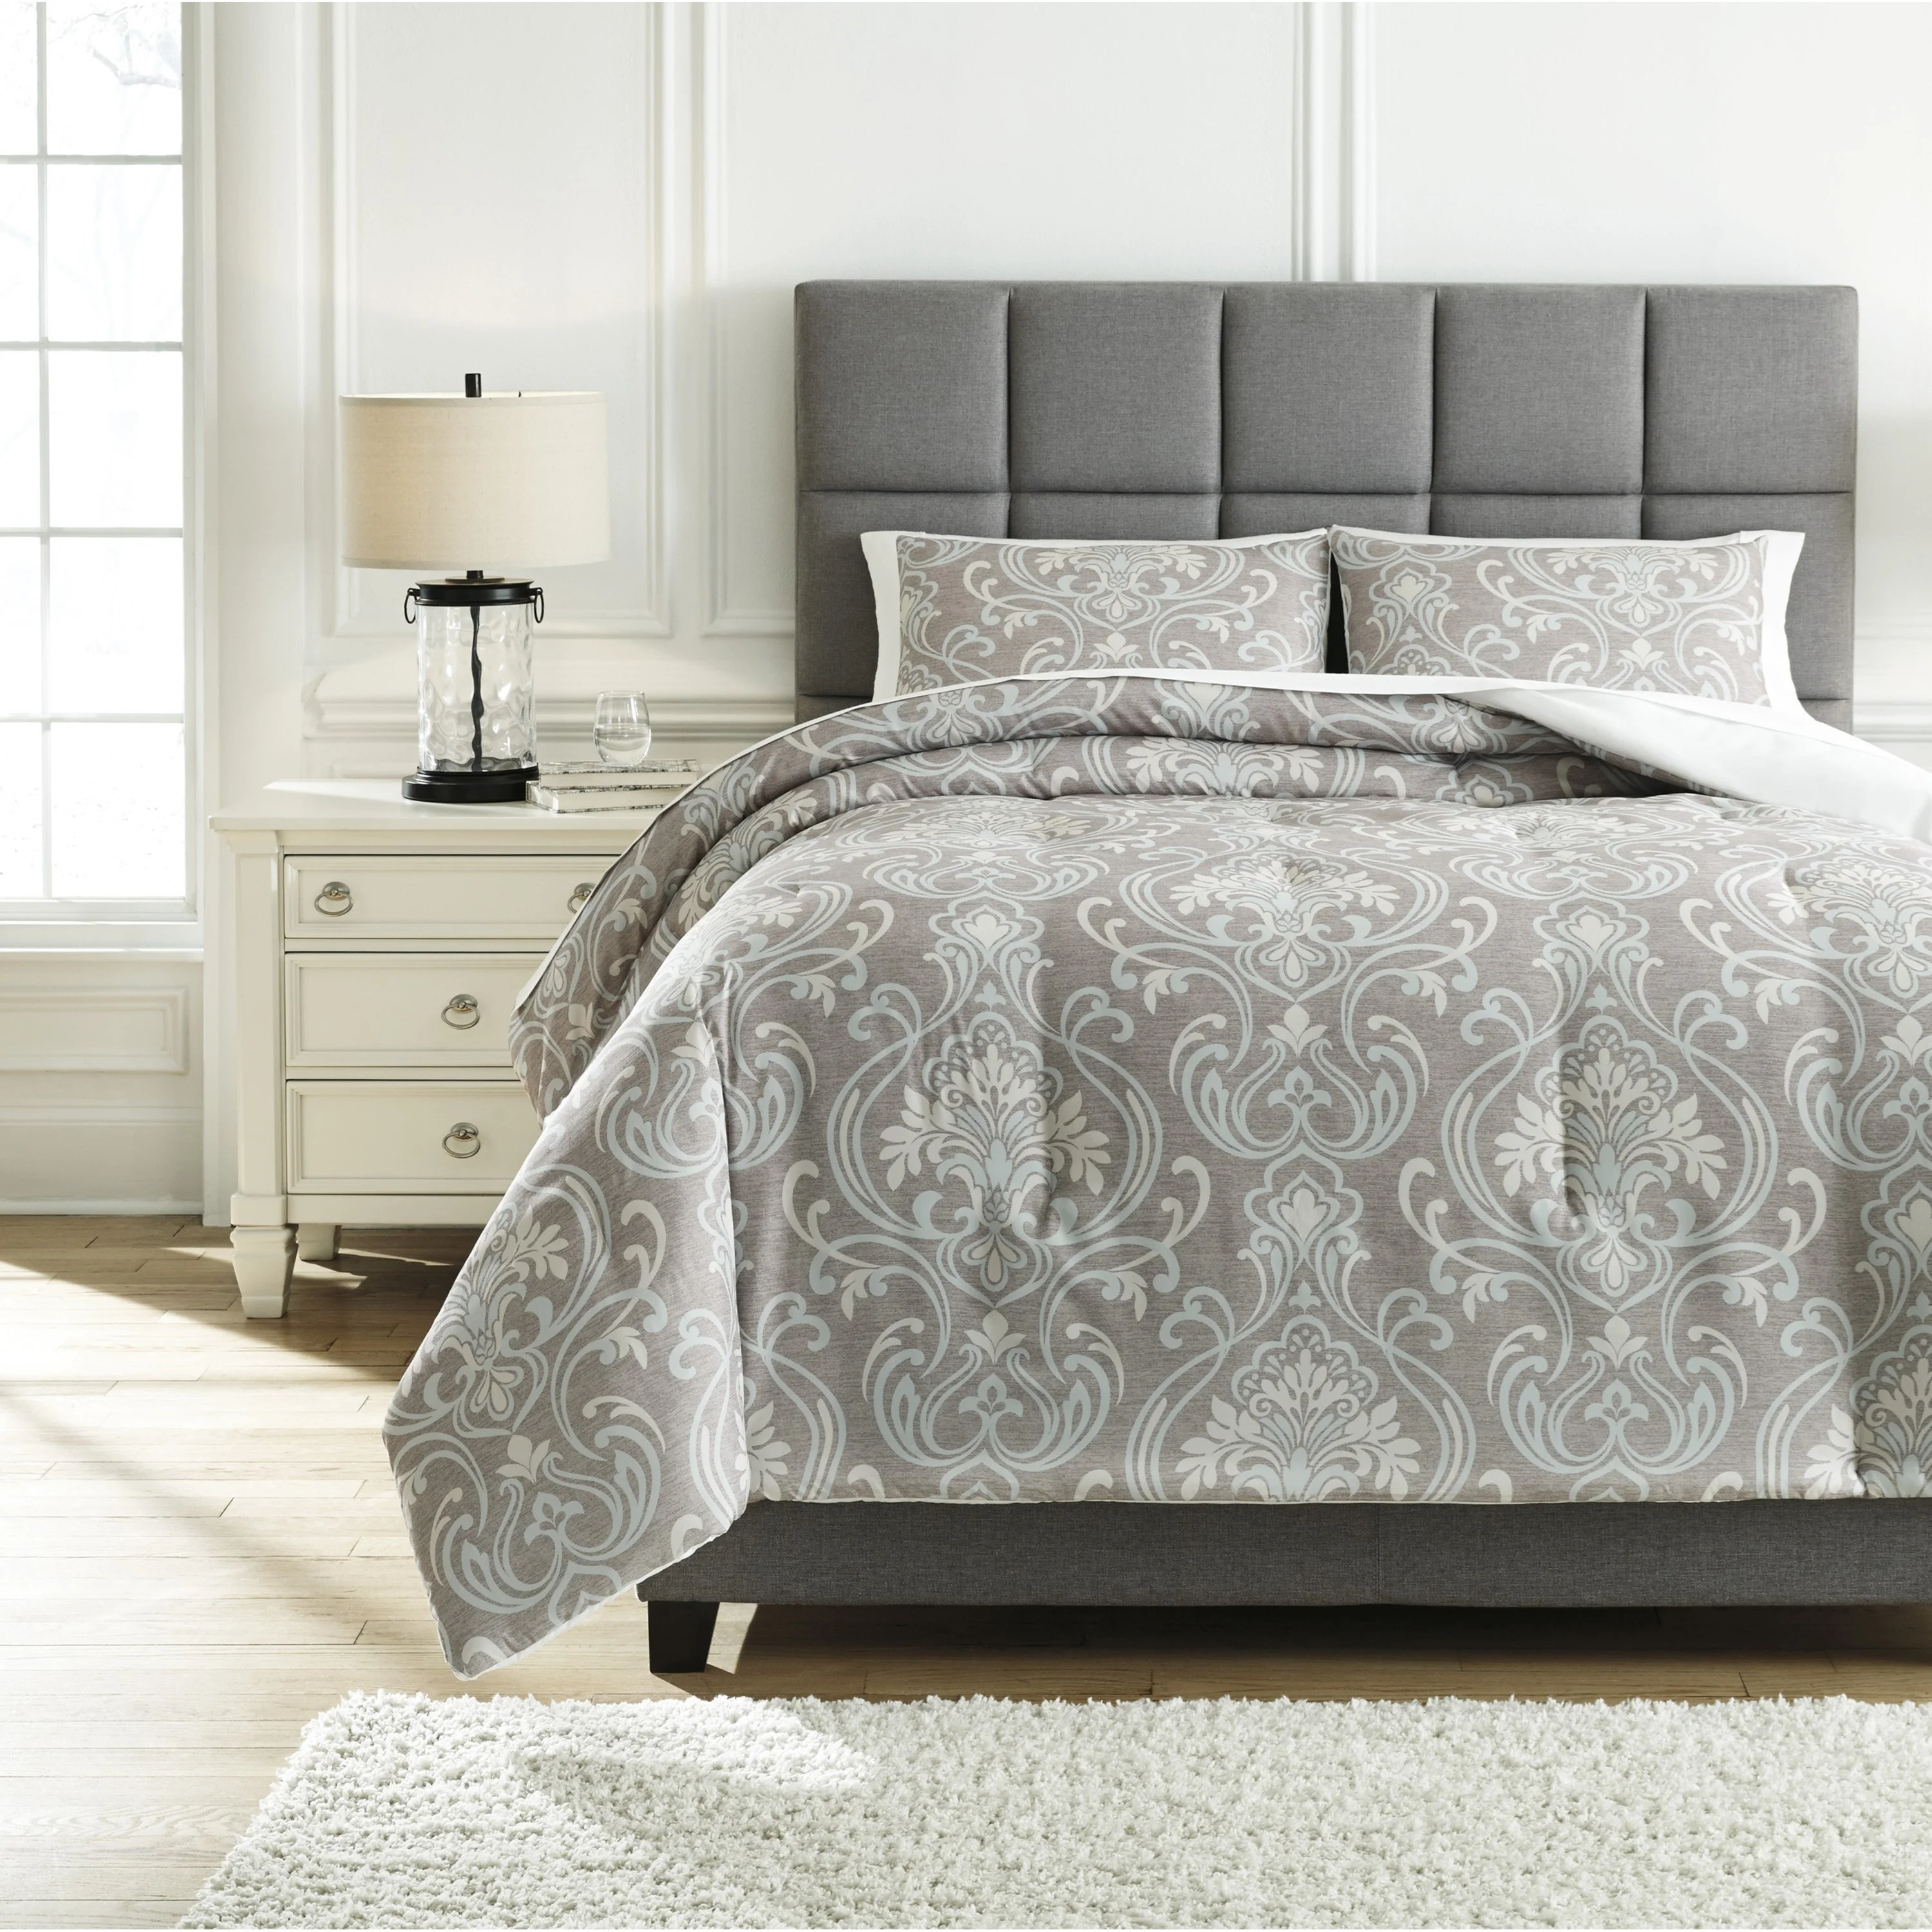 Bedding Sale, Bedding Clearance